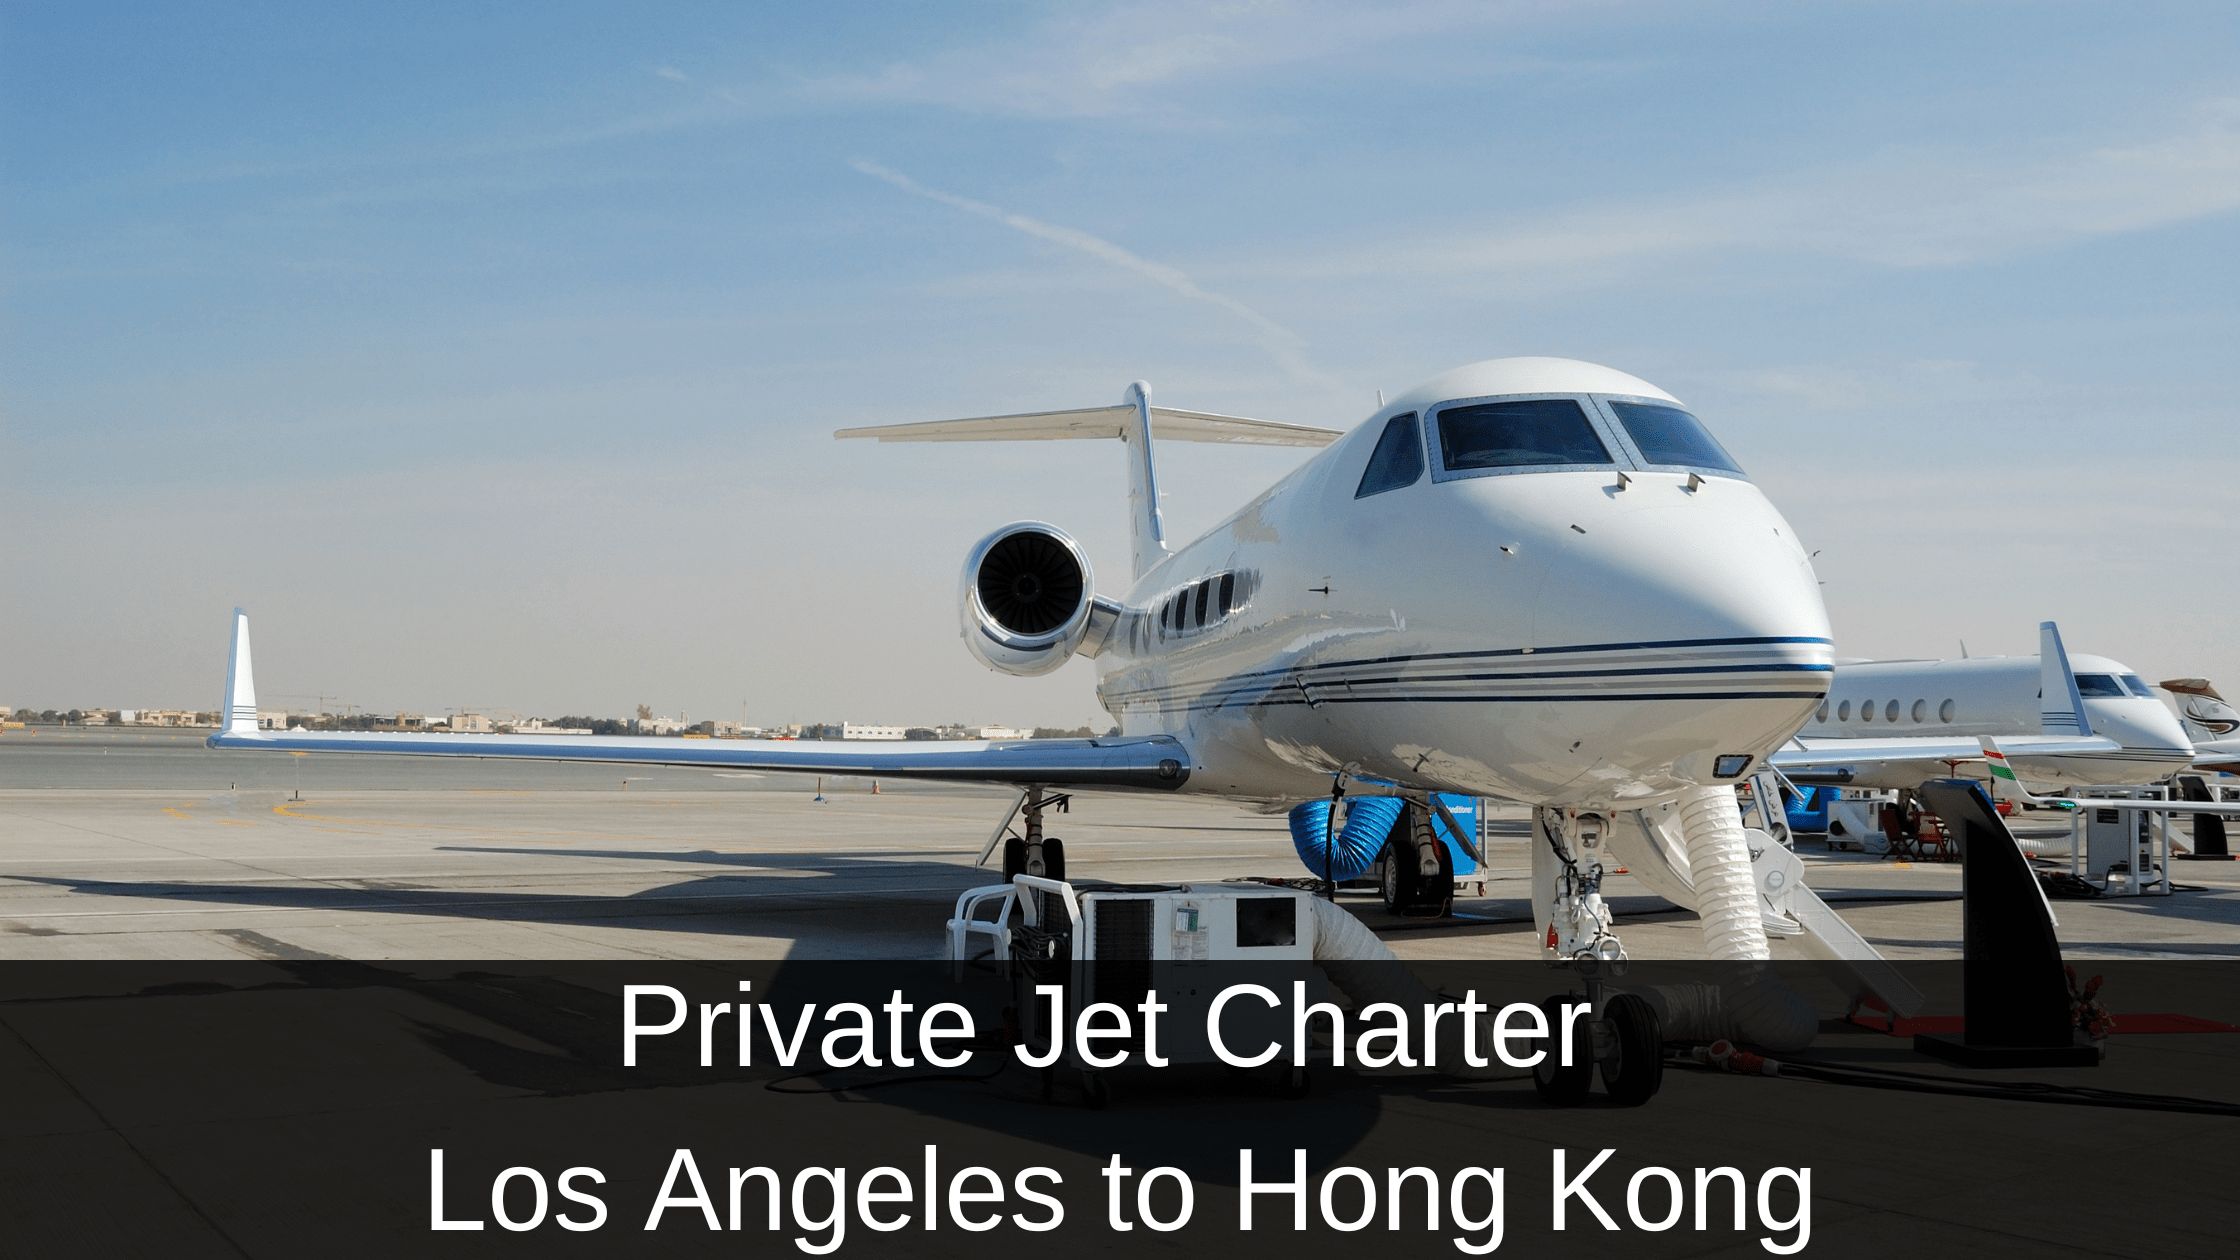 Private Jet Charter from Los Angeles to Hong Kong